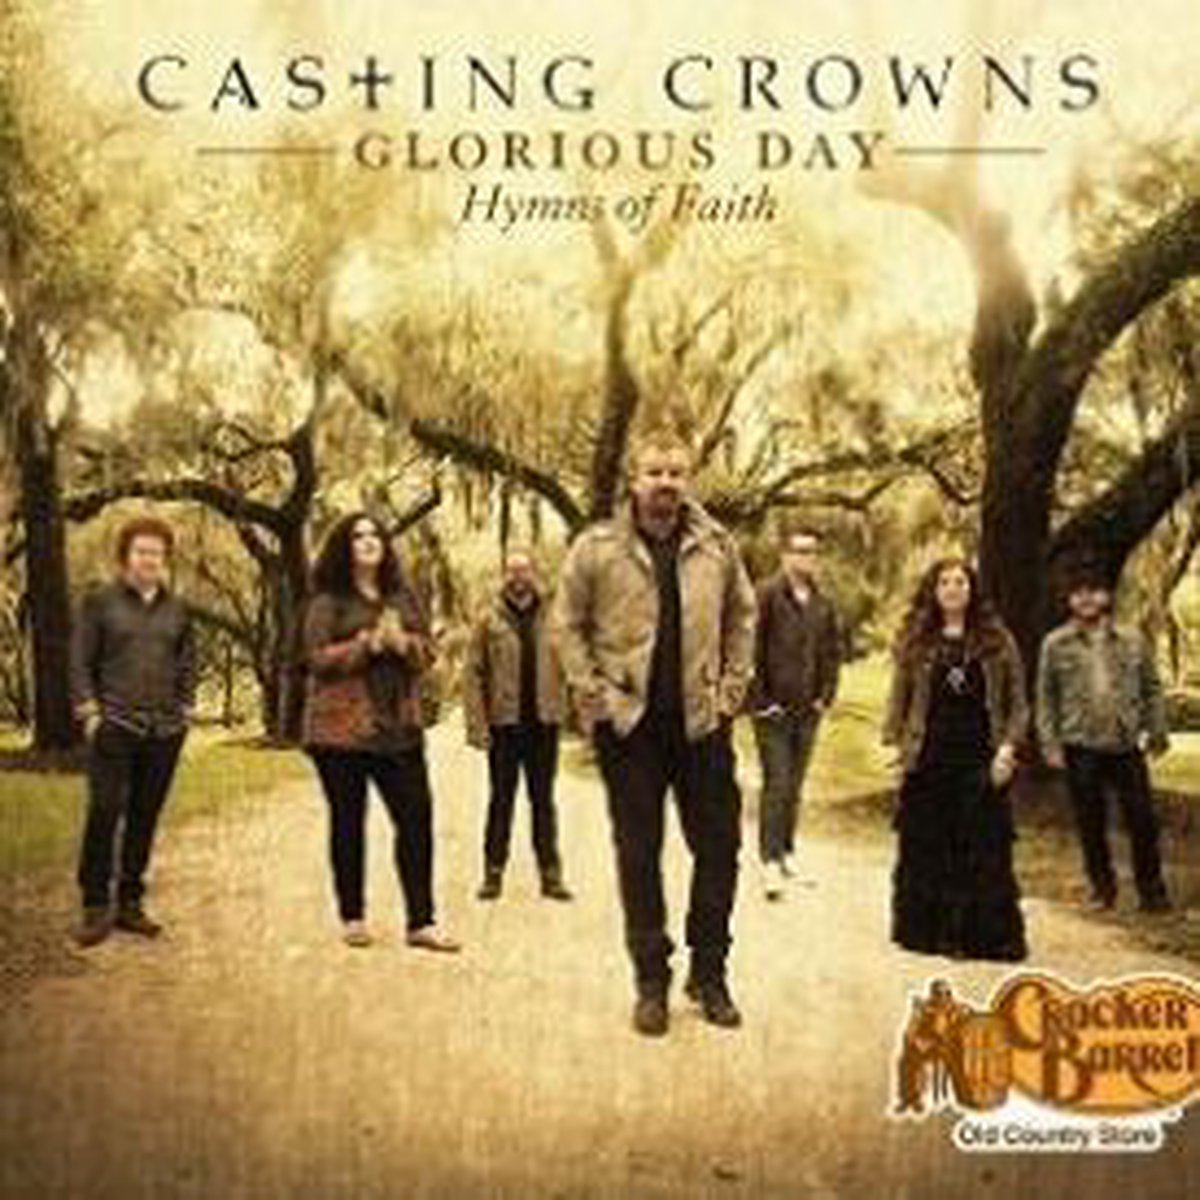 Casting Crowns Glorious Day. Hymns of Faith, Casting Crowns Muziek